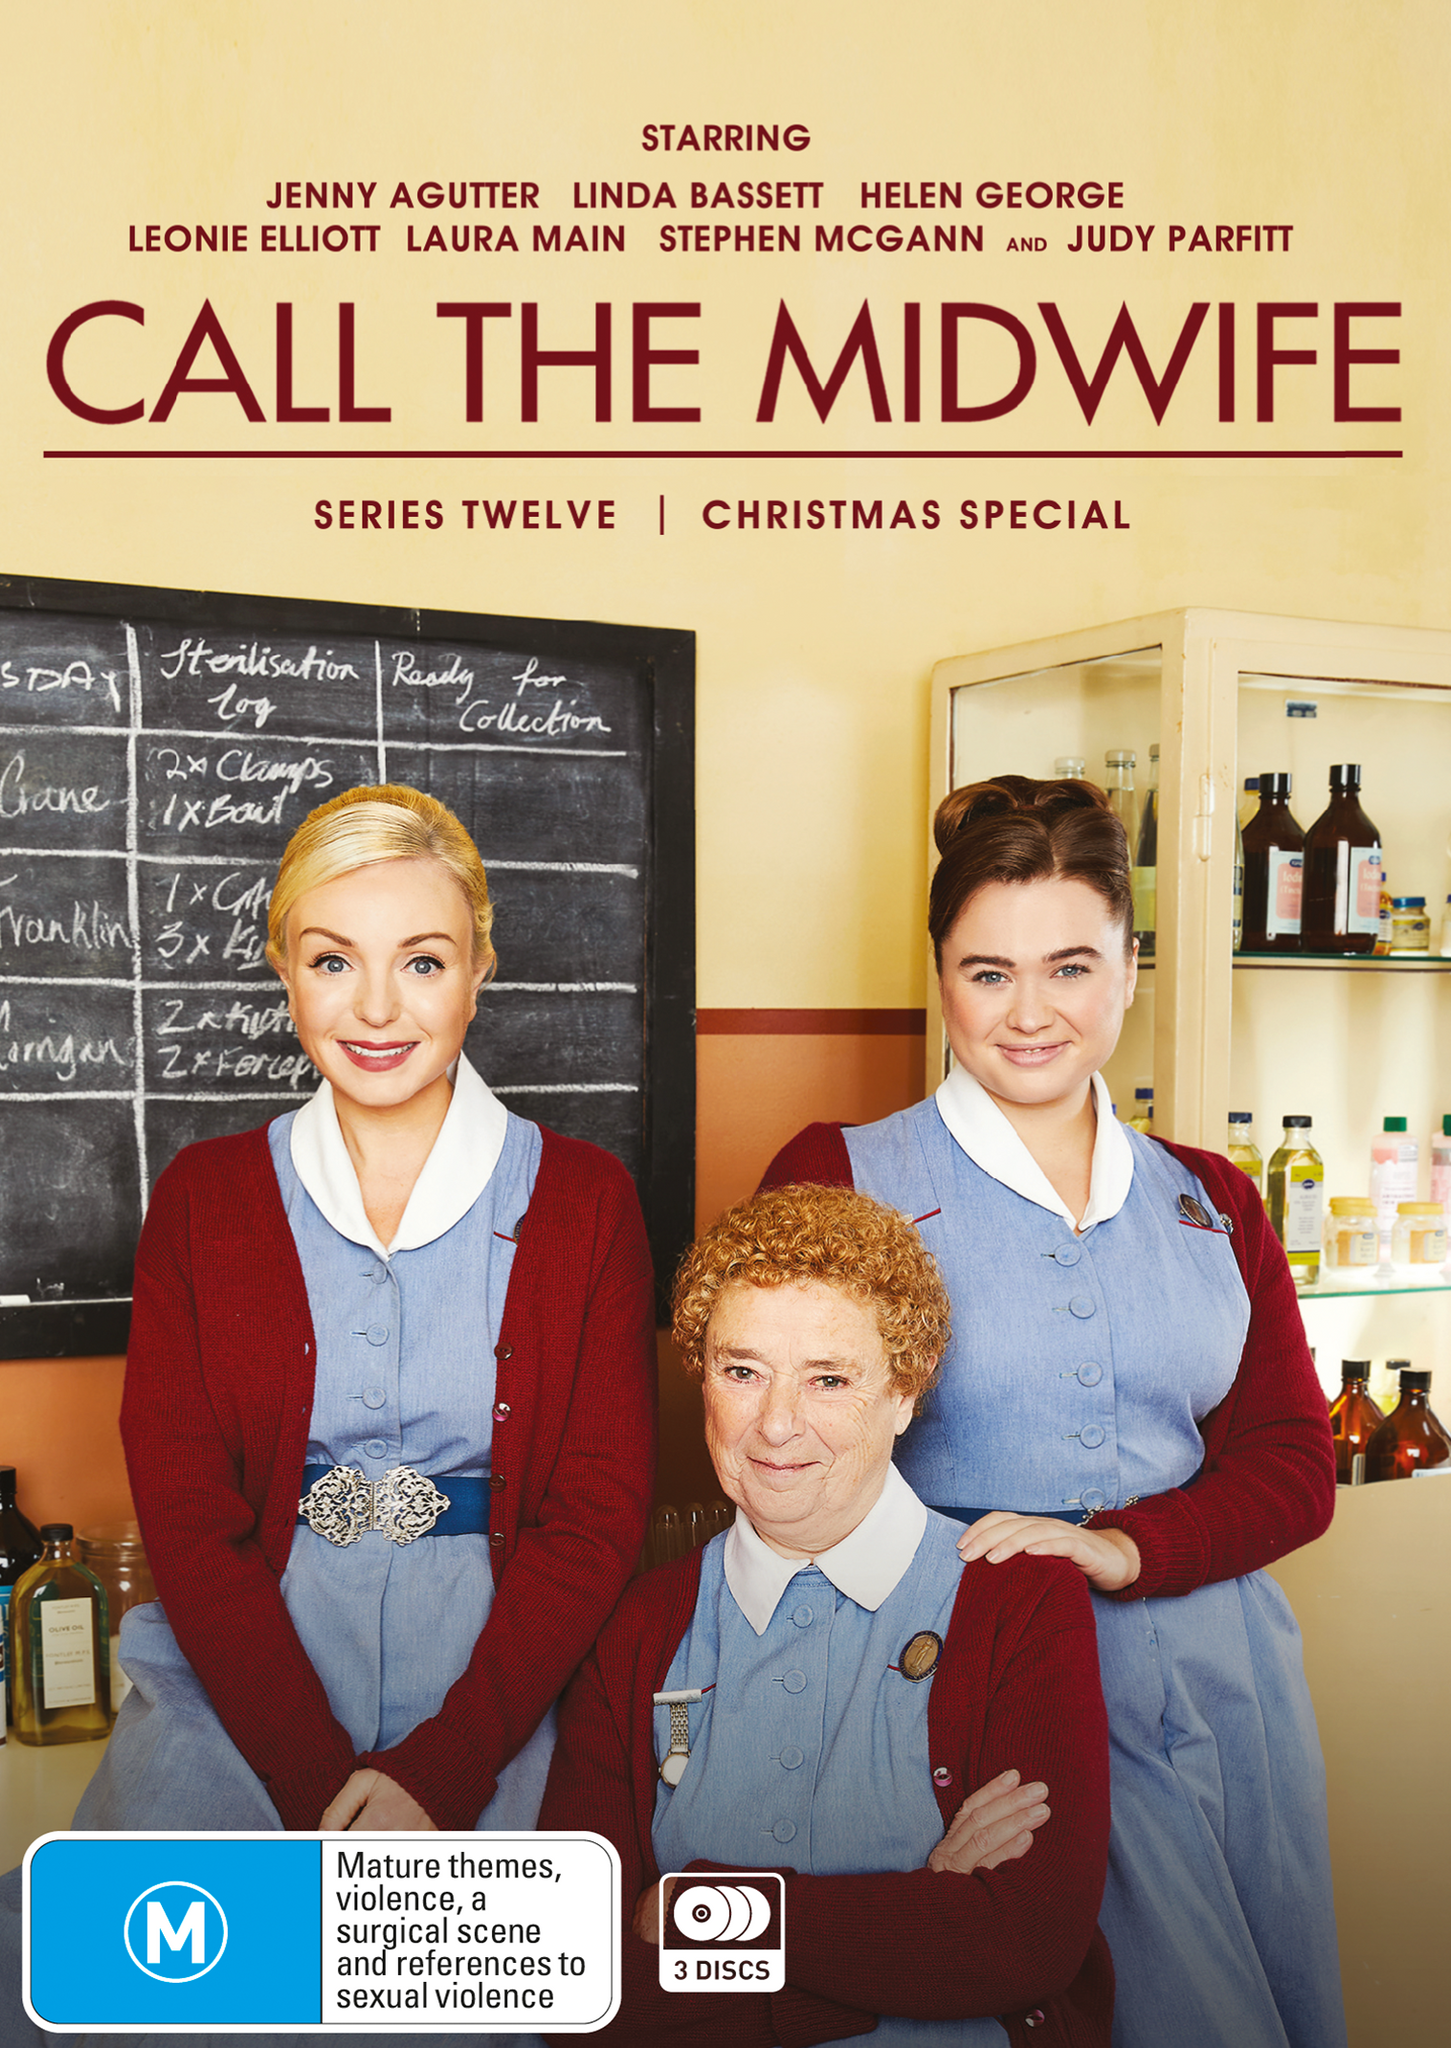 CALL THE MIDWIFE: SERIES 12